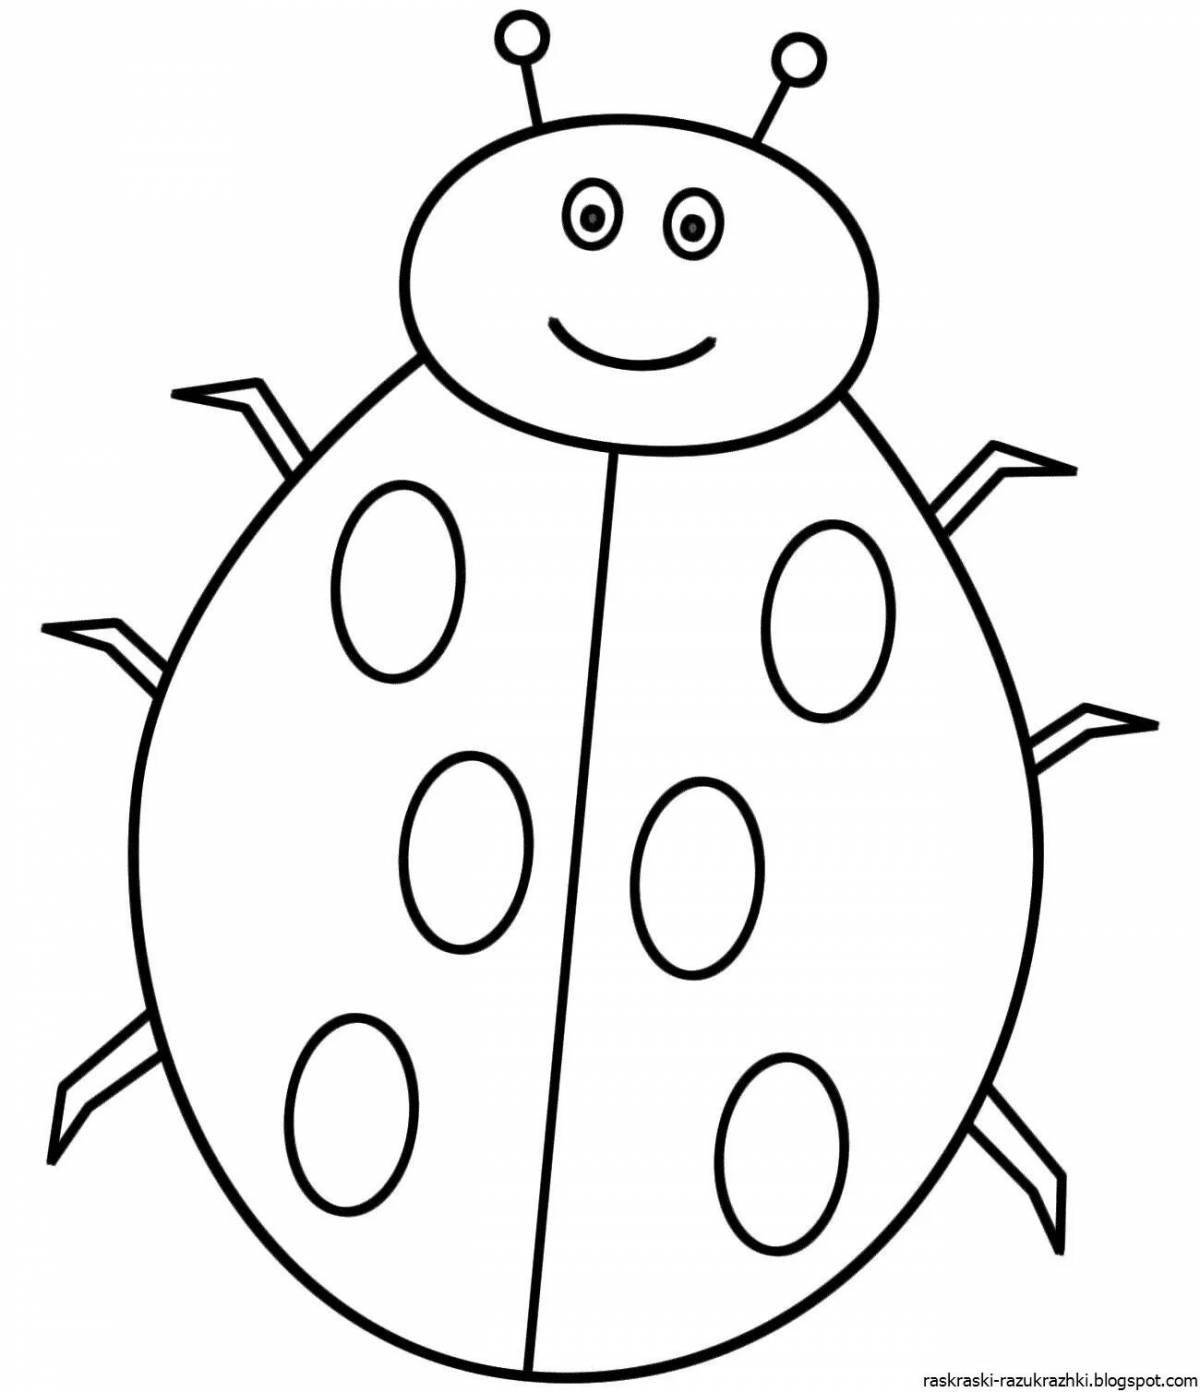 Funny ladybug coloring book for kids